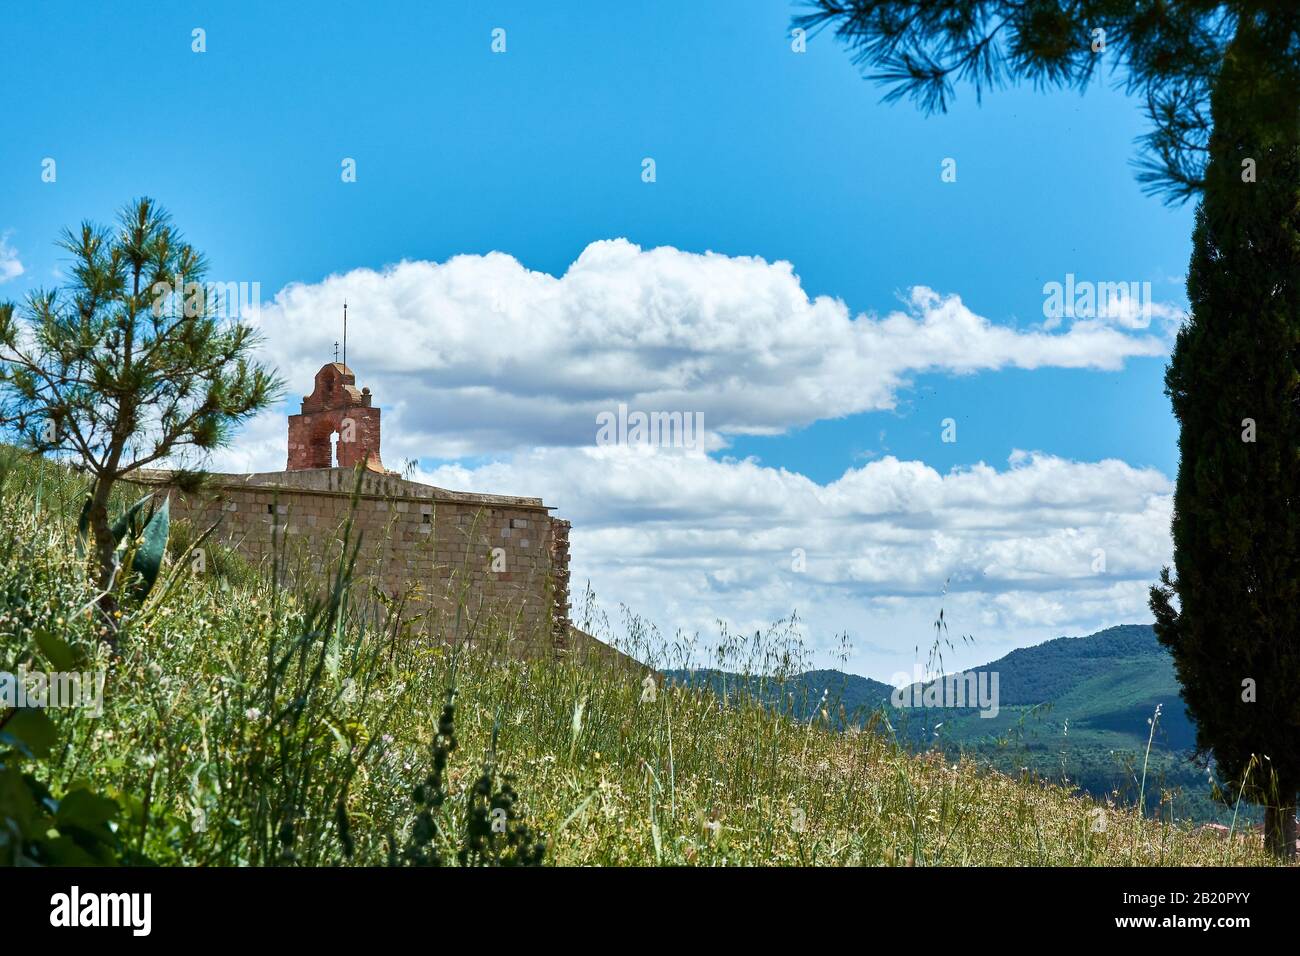 View of the top of the Church of Saint Mary in the medieval city of Montblanc, in the province of Tarragona, Spain. Stock Photo